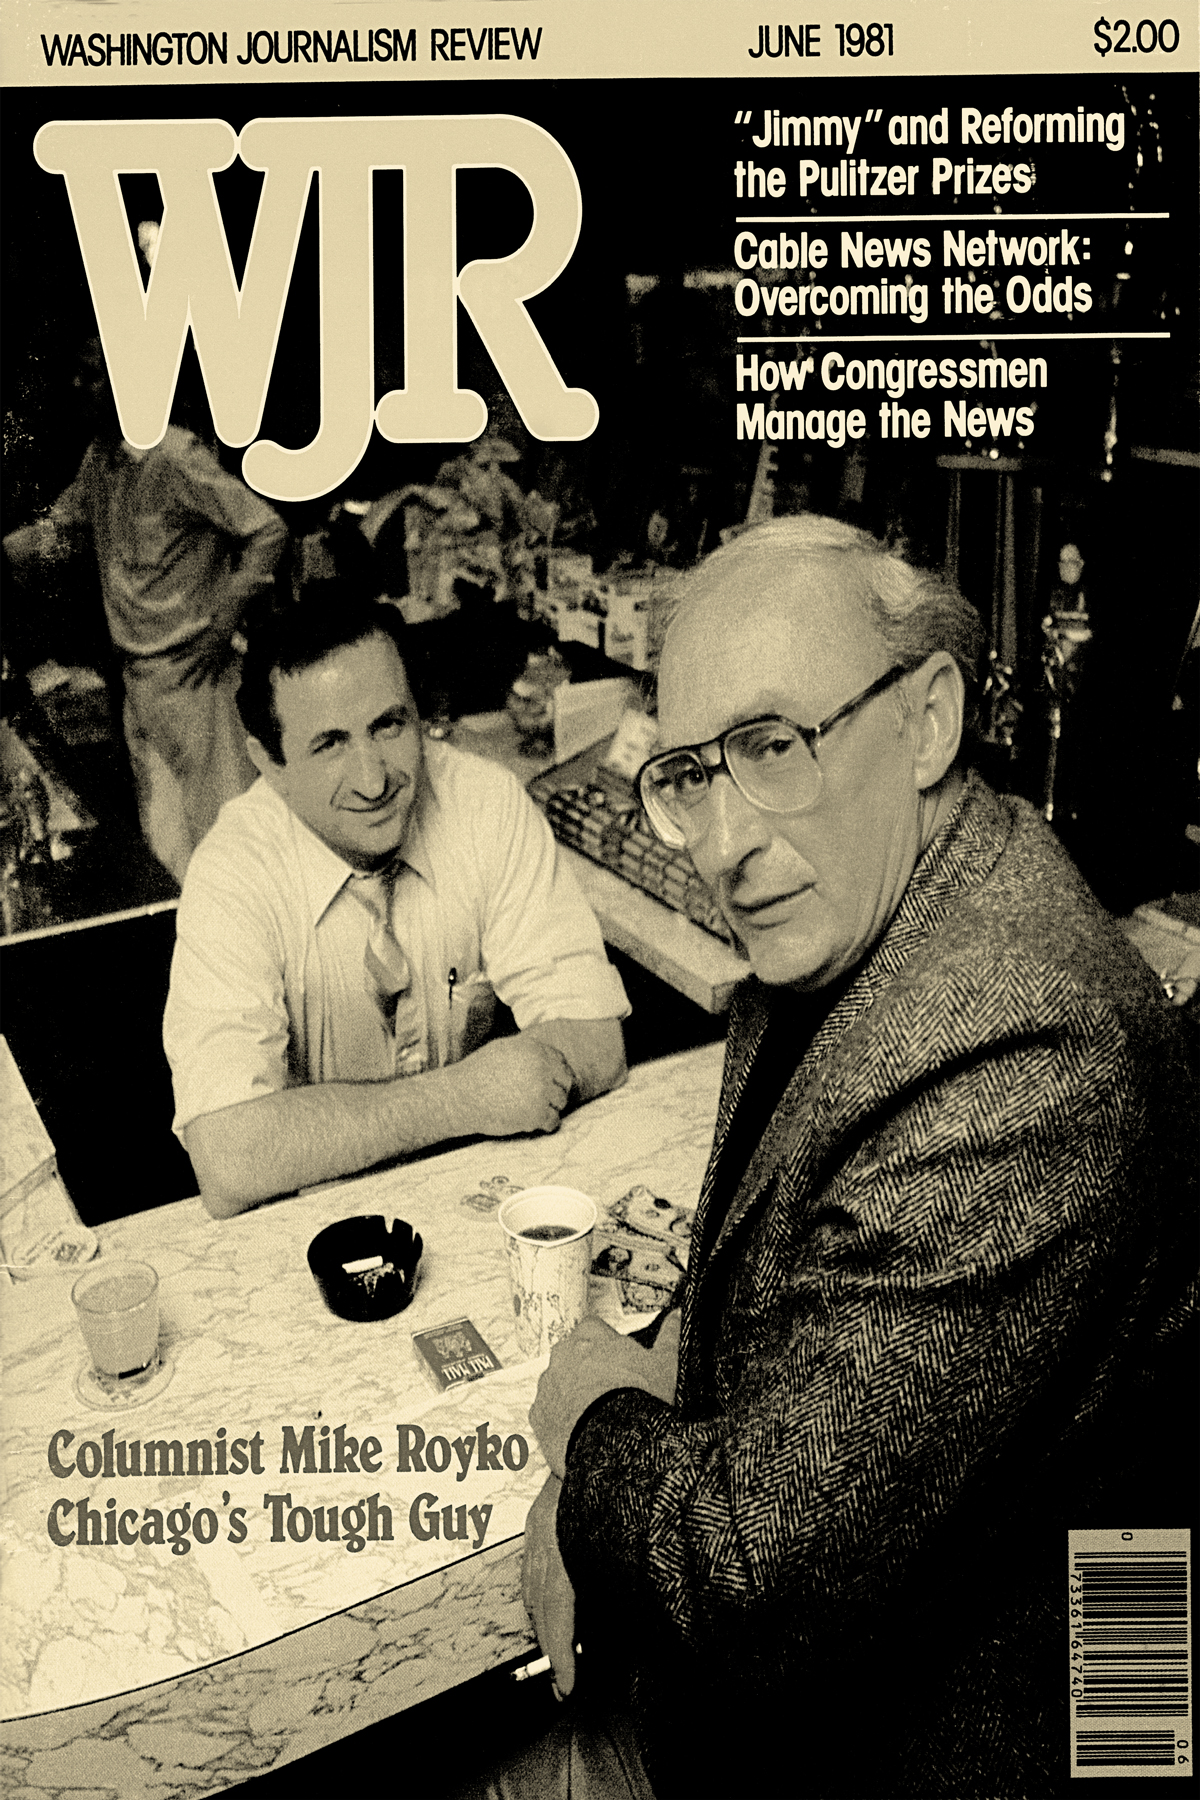 Happy birthday to a Chicago legend our friend Mike Royko! 